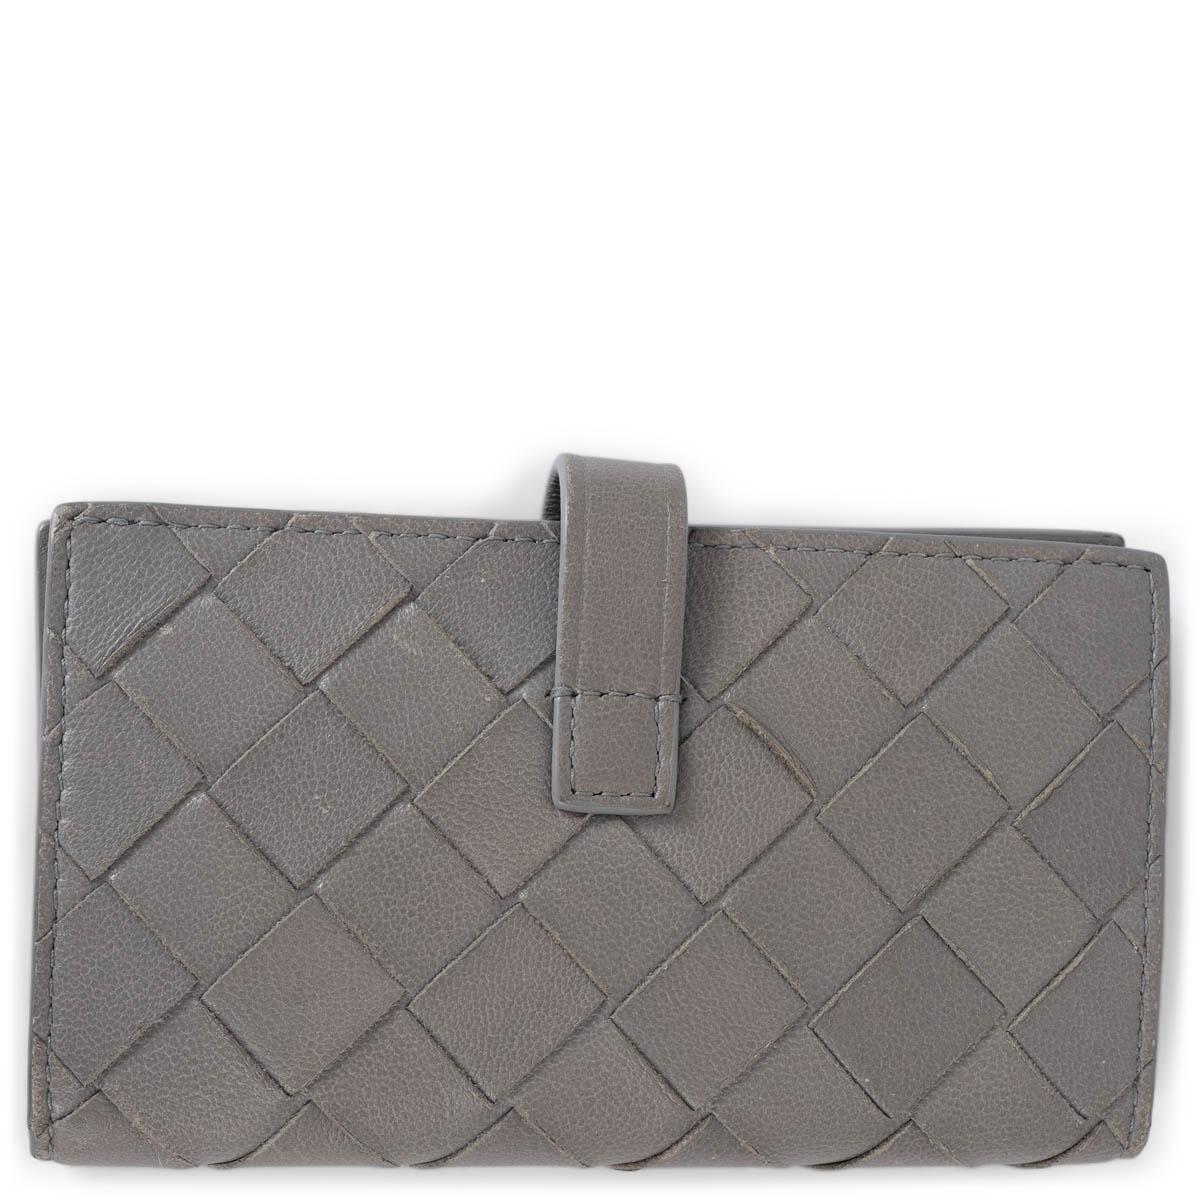 100% authentic Bottega Veneta Intrecciato key and card wallet in grey Nappa leather featuring gold-tone hardware. Has been carried and shows faint wear to the corners and the Intrecciato. Overall in very good condition. 

Measurements
Width	7cm